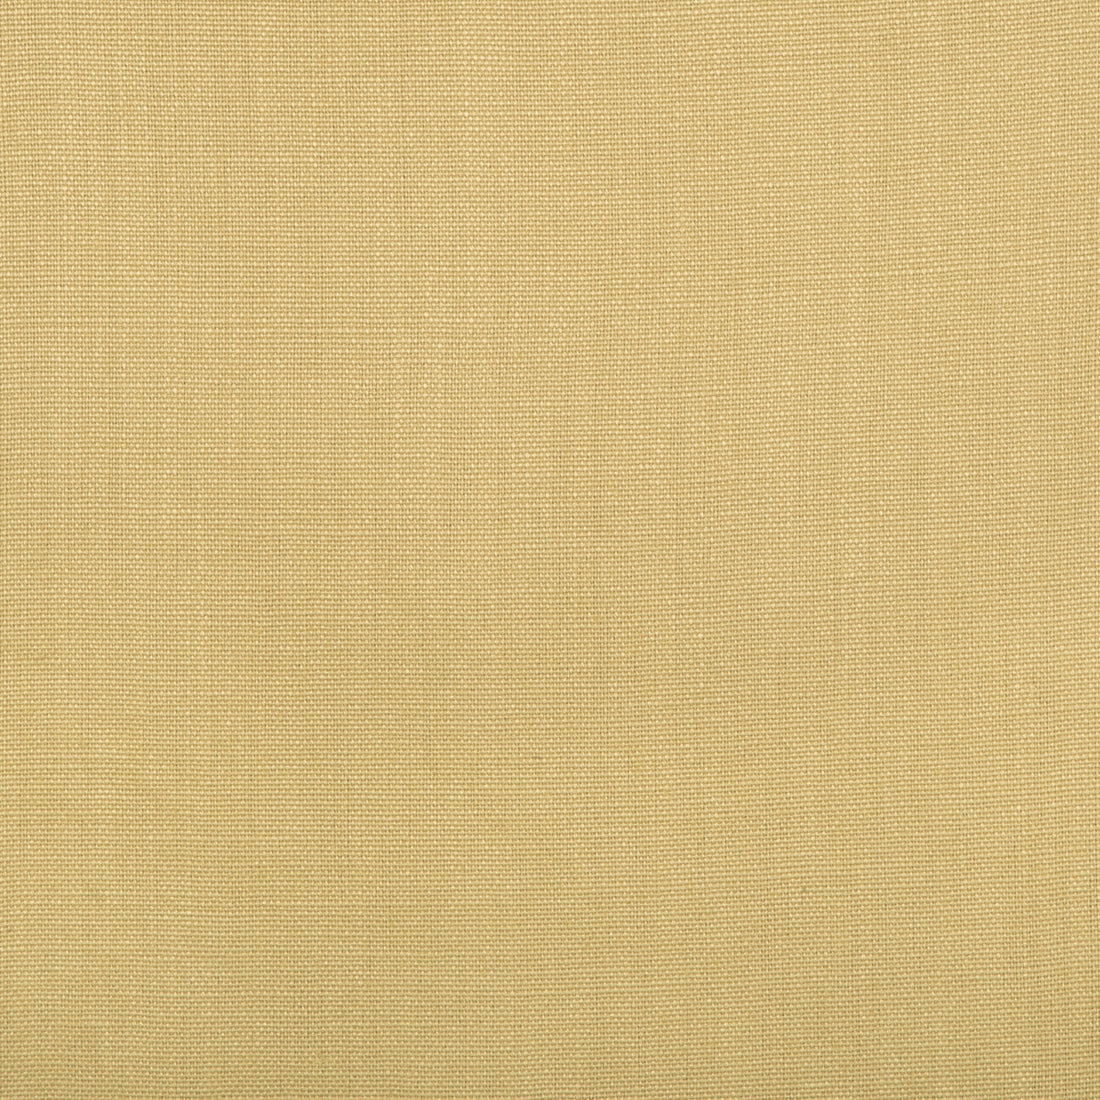 Stone Harbor fabric in wheat color - pattern 27591.414.0 - by Kravet Basics